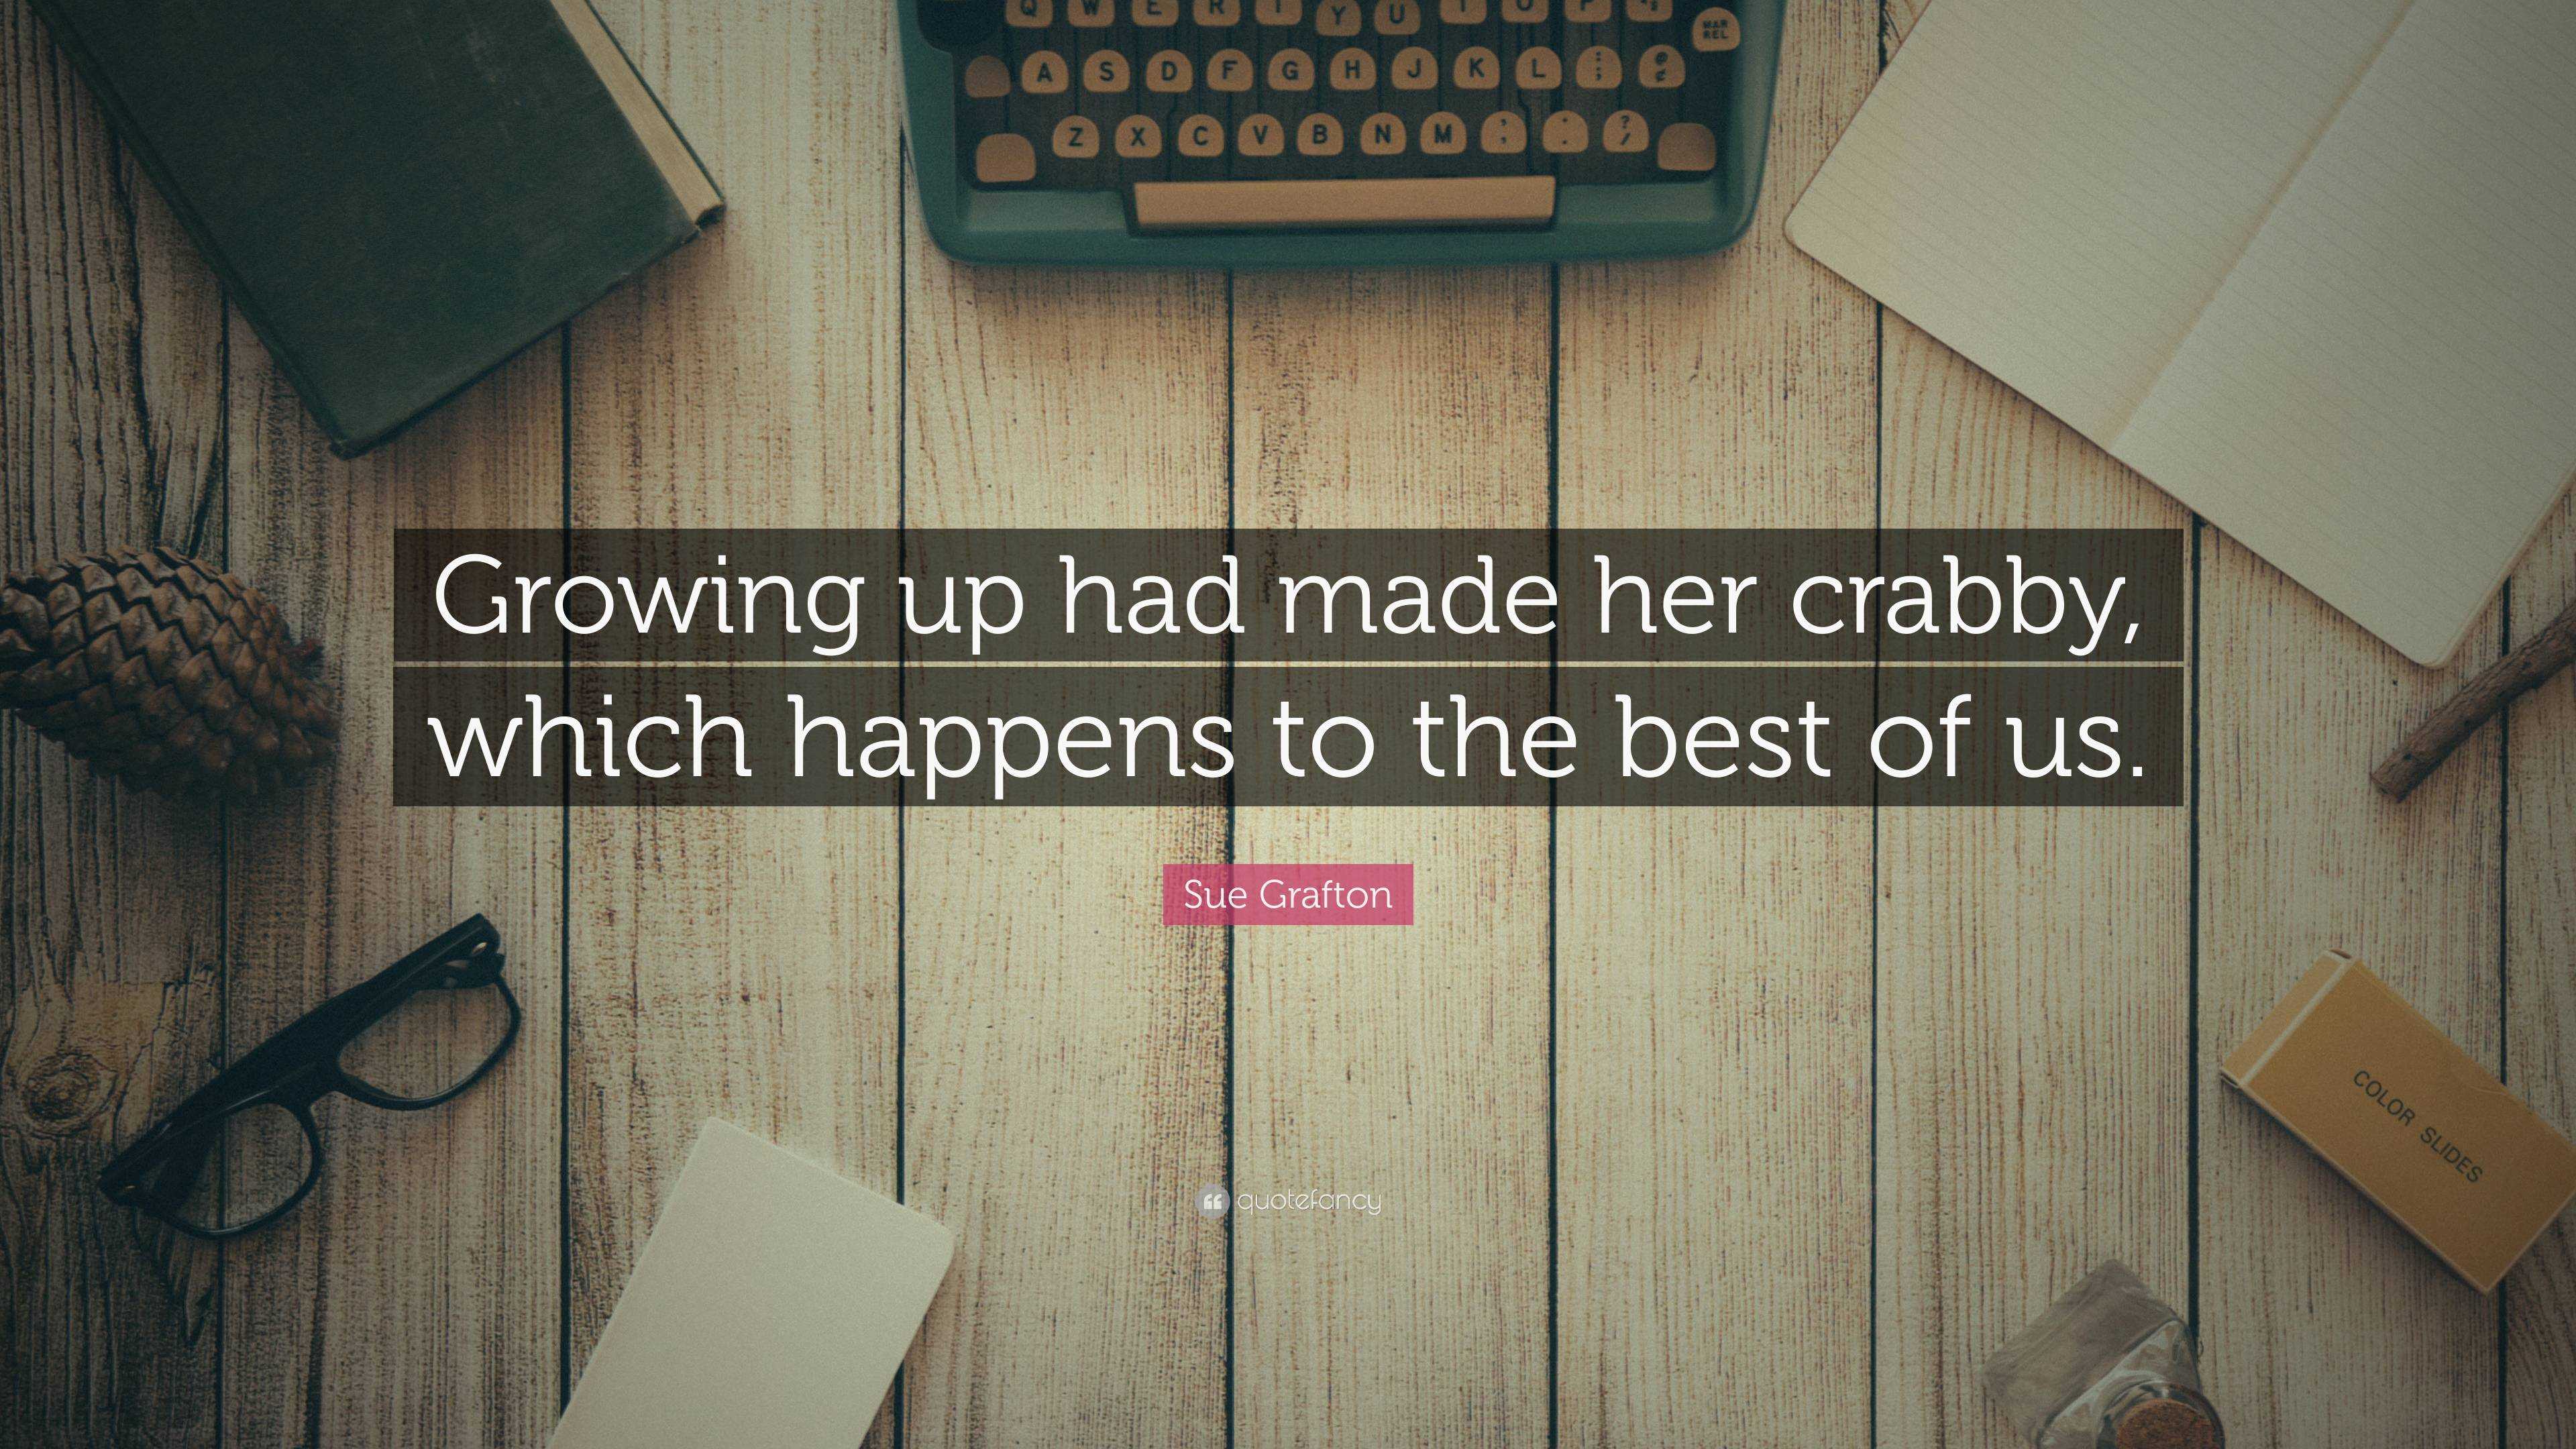 Sue Grafton Quote: “Growing up had made her crabby, which happens to the  best of us.”